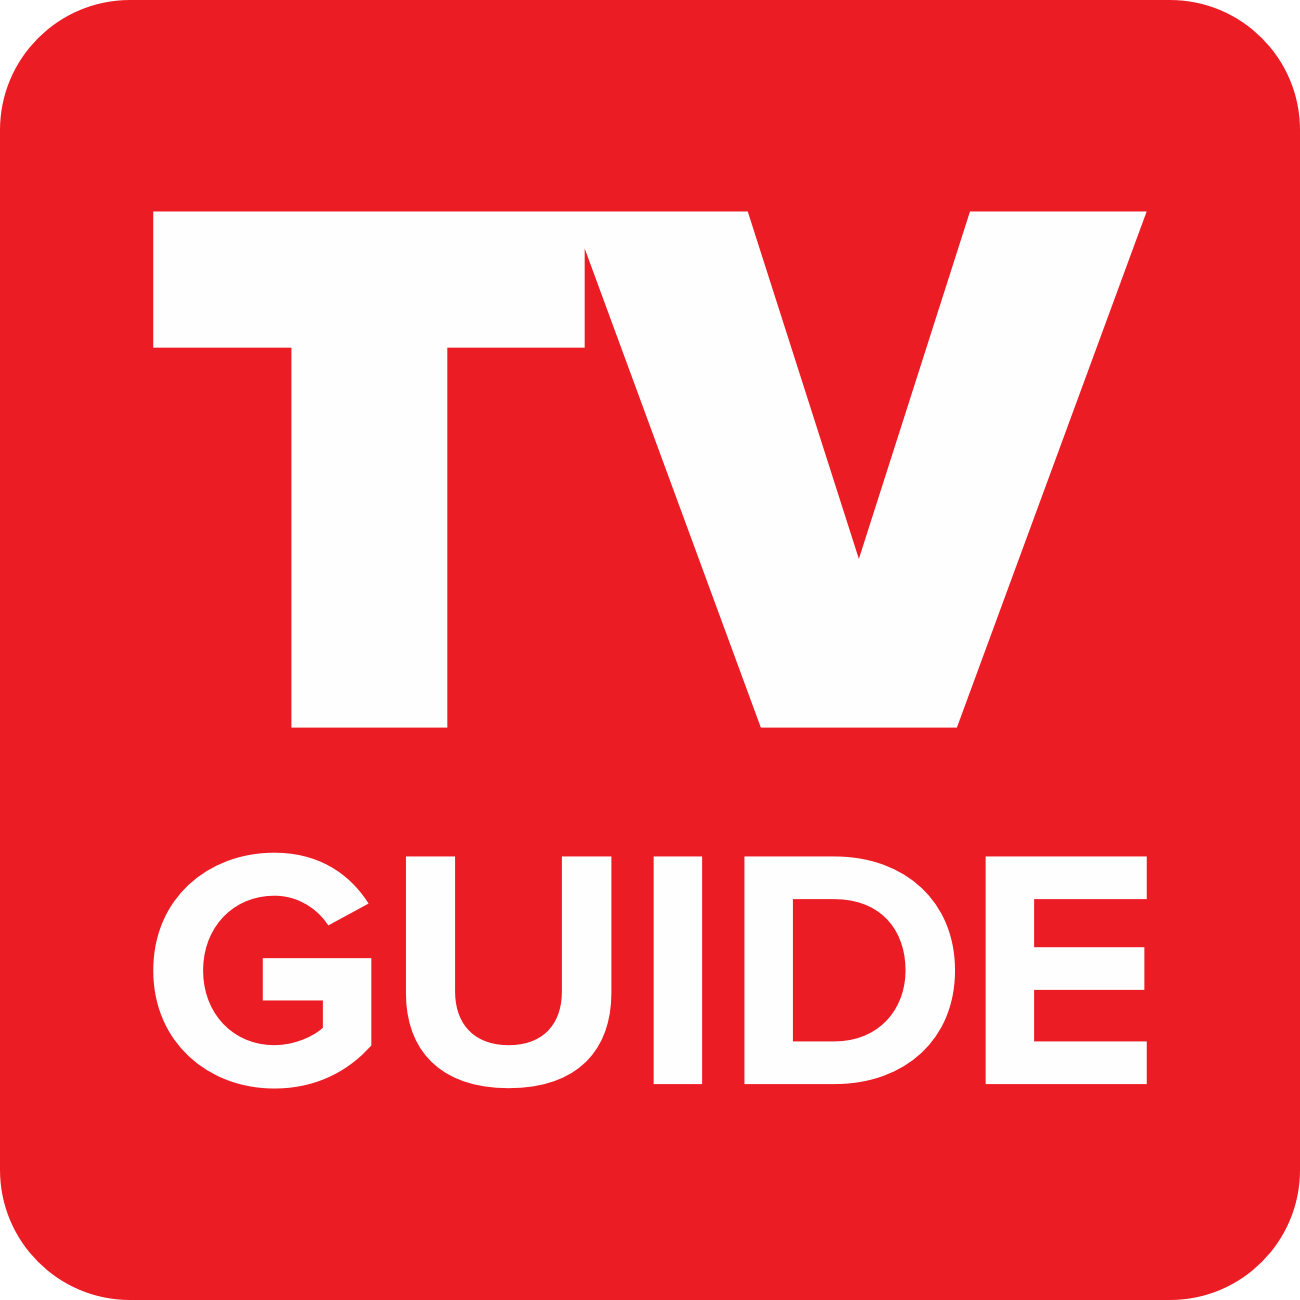 American Cable Television Company Logo - TV Guide, TV Listings, Online Videos, Entertainment News